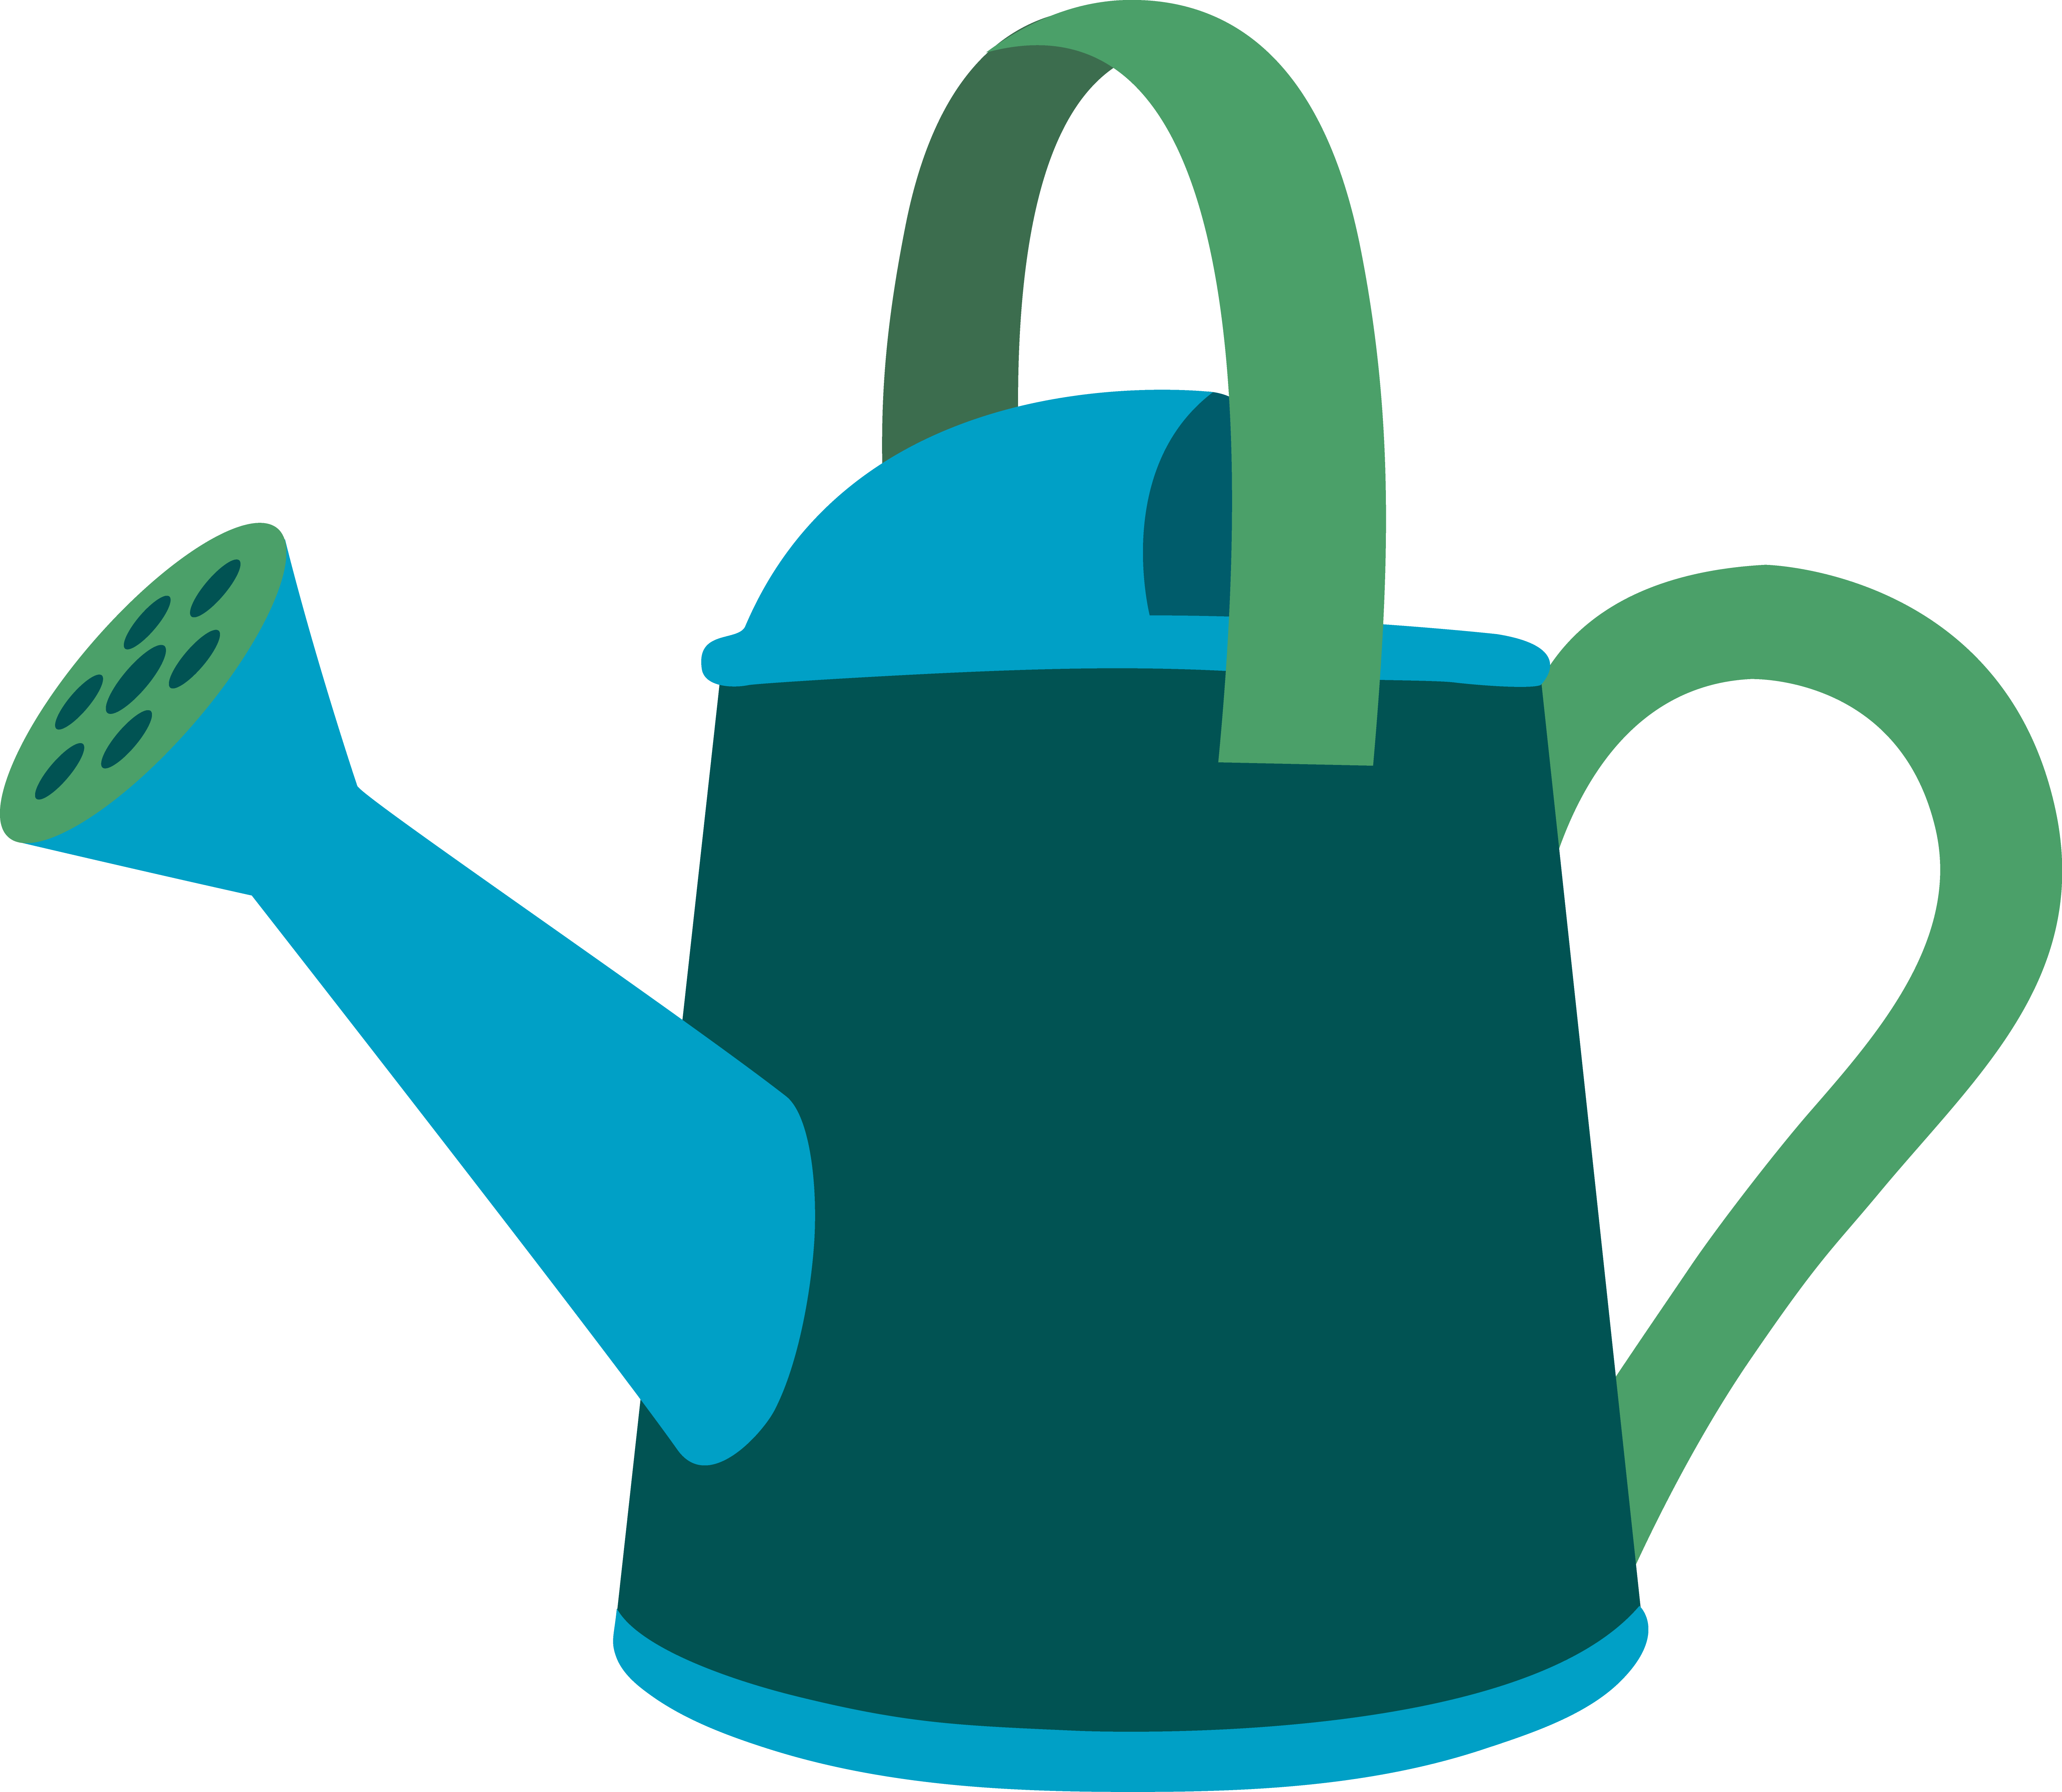 watering can clip art - Watering Can Clipart